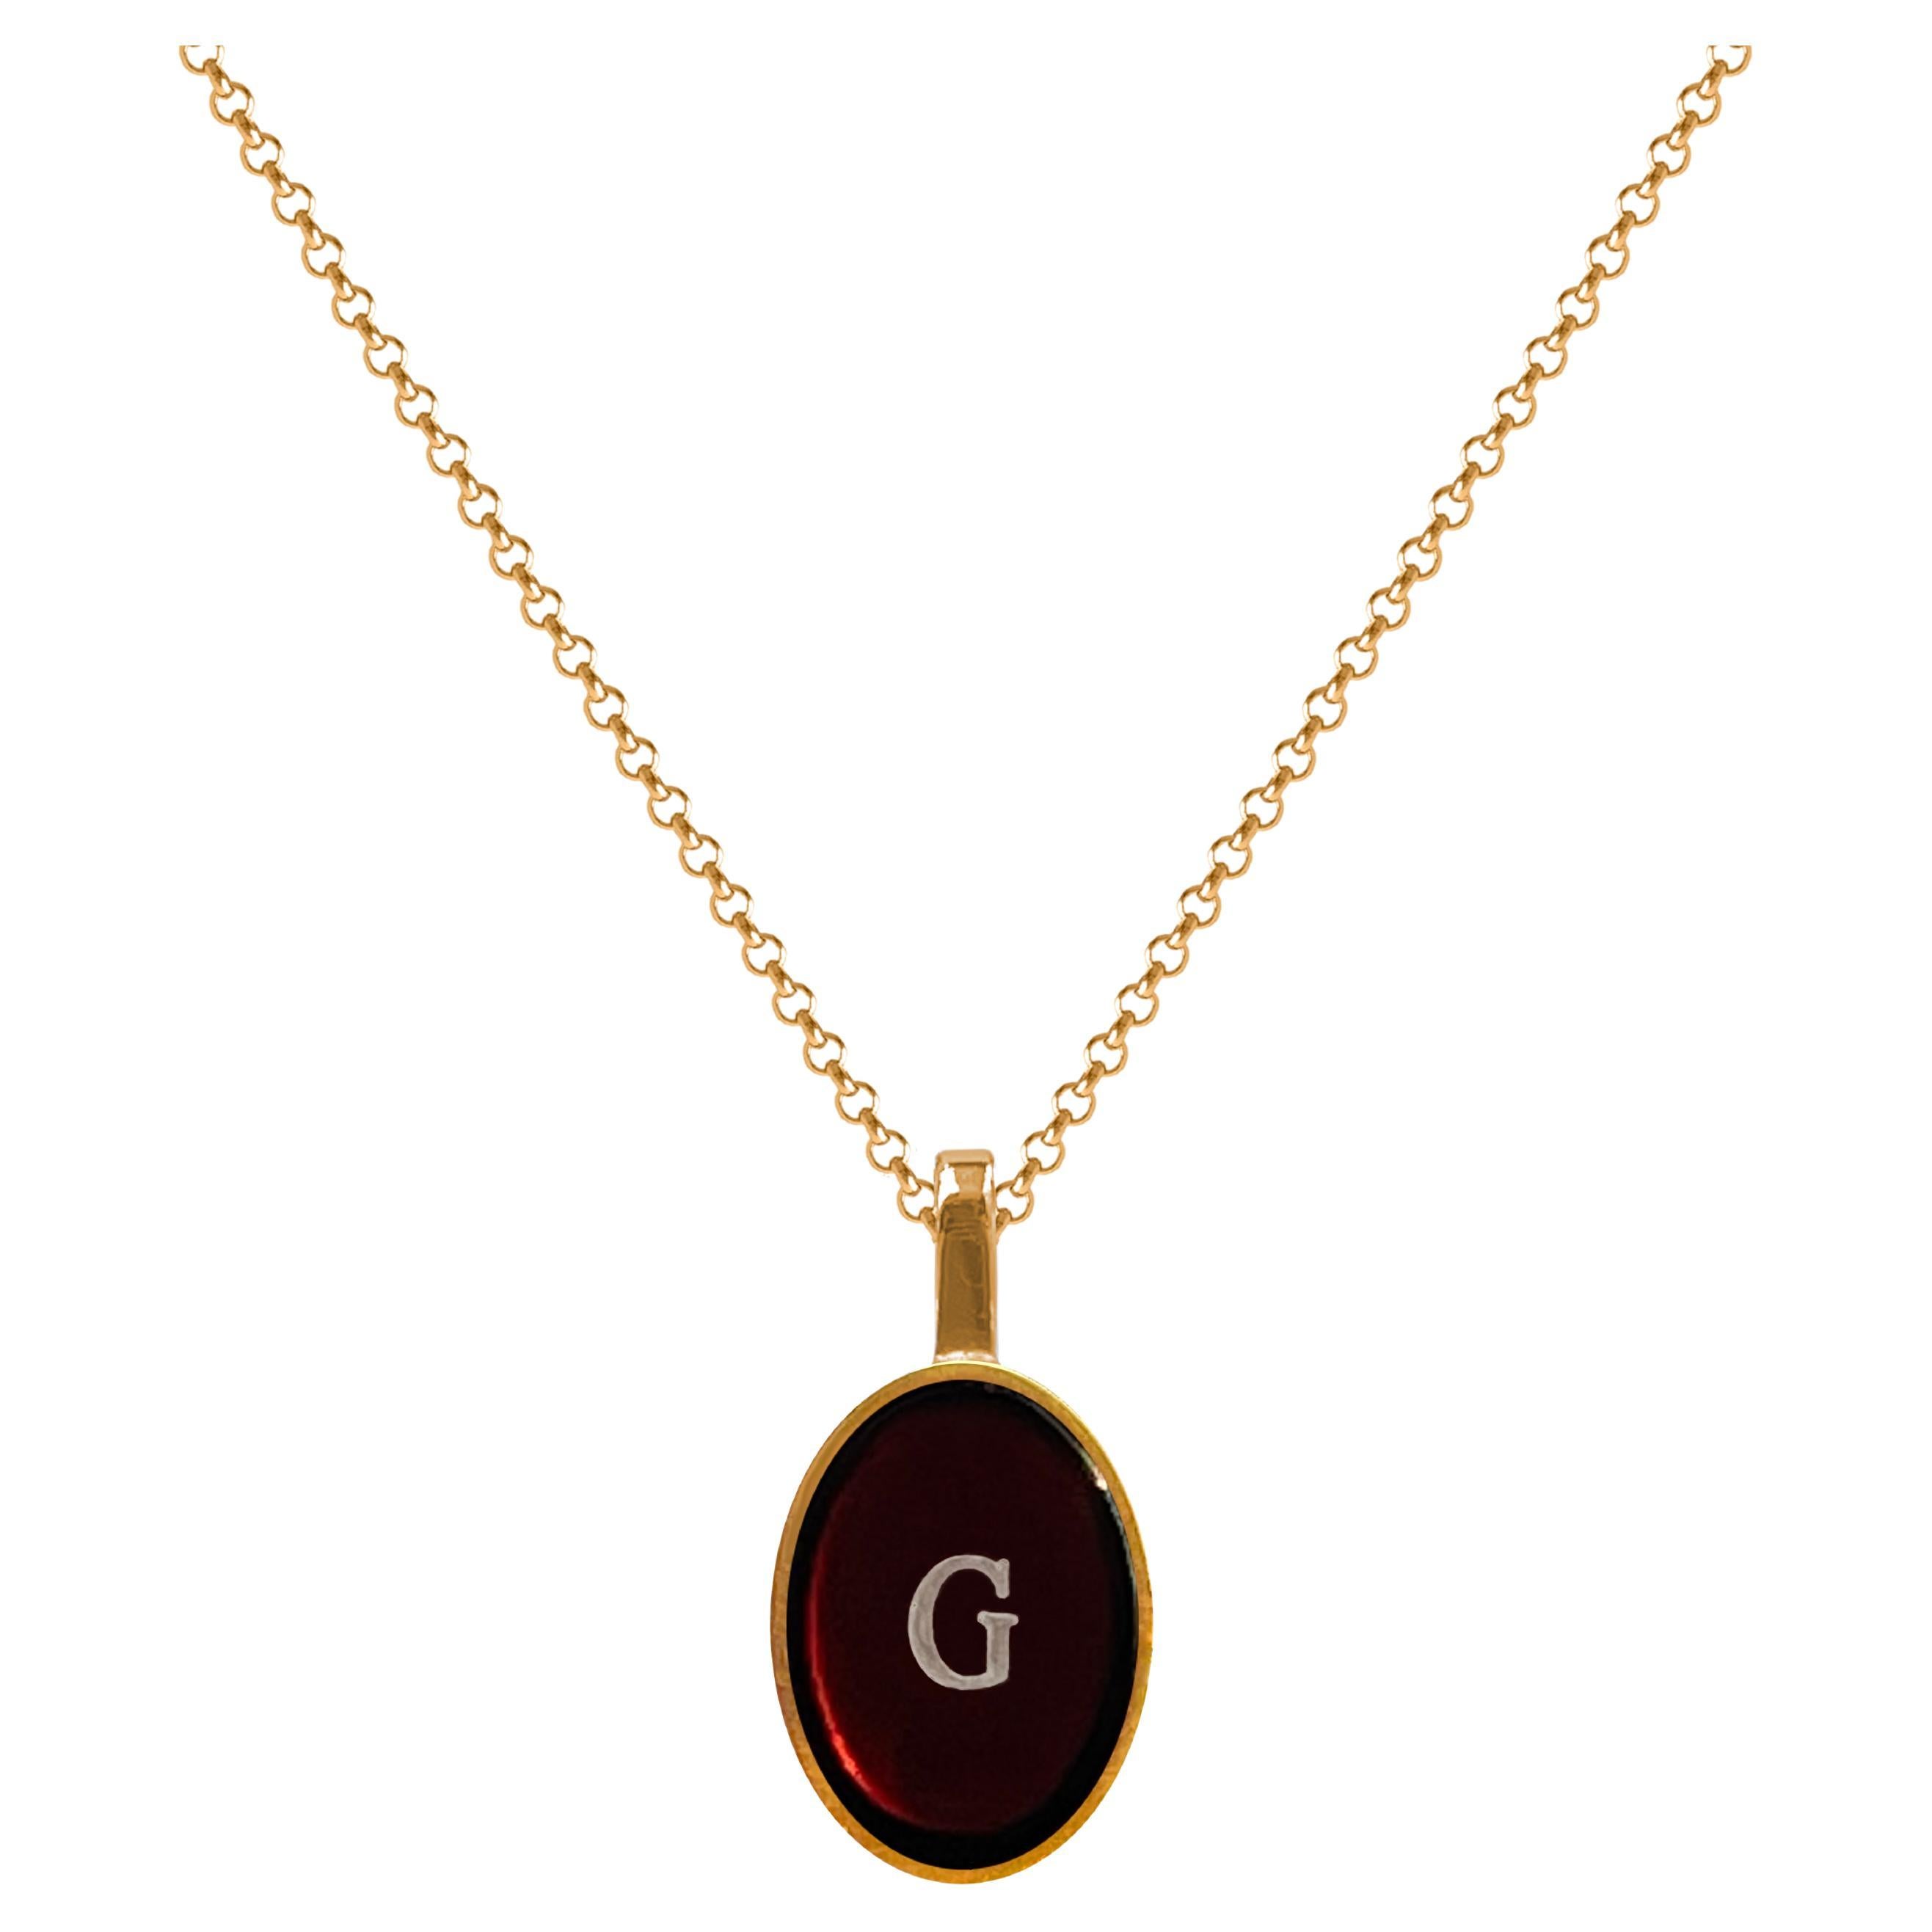 Necklace with amber pendant and name letter gold - G For Sale